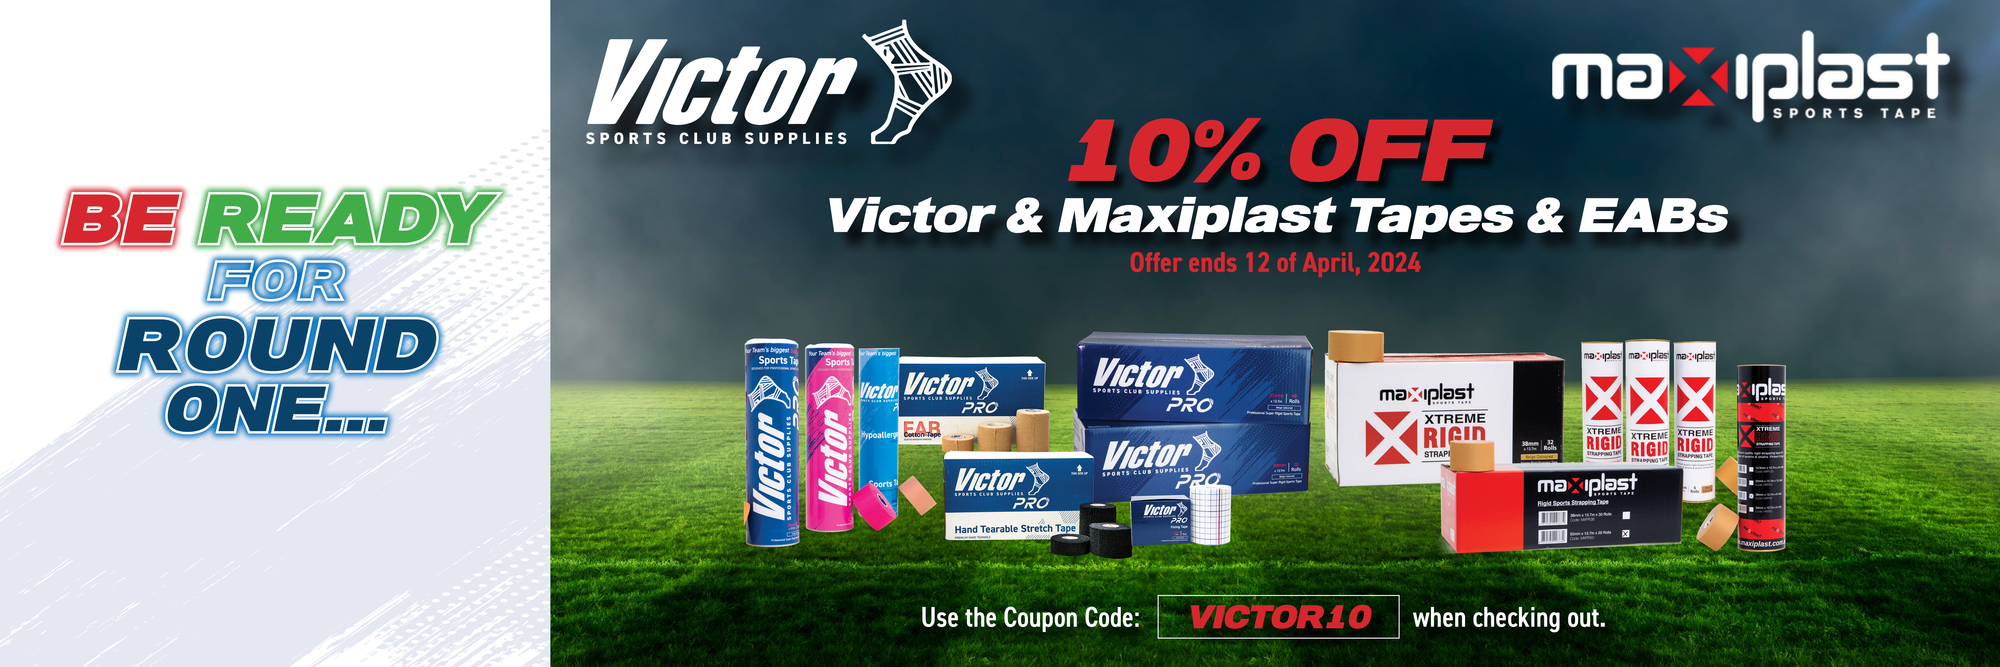 Sale on Victor and Maxiplast Tapes & EABs